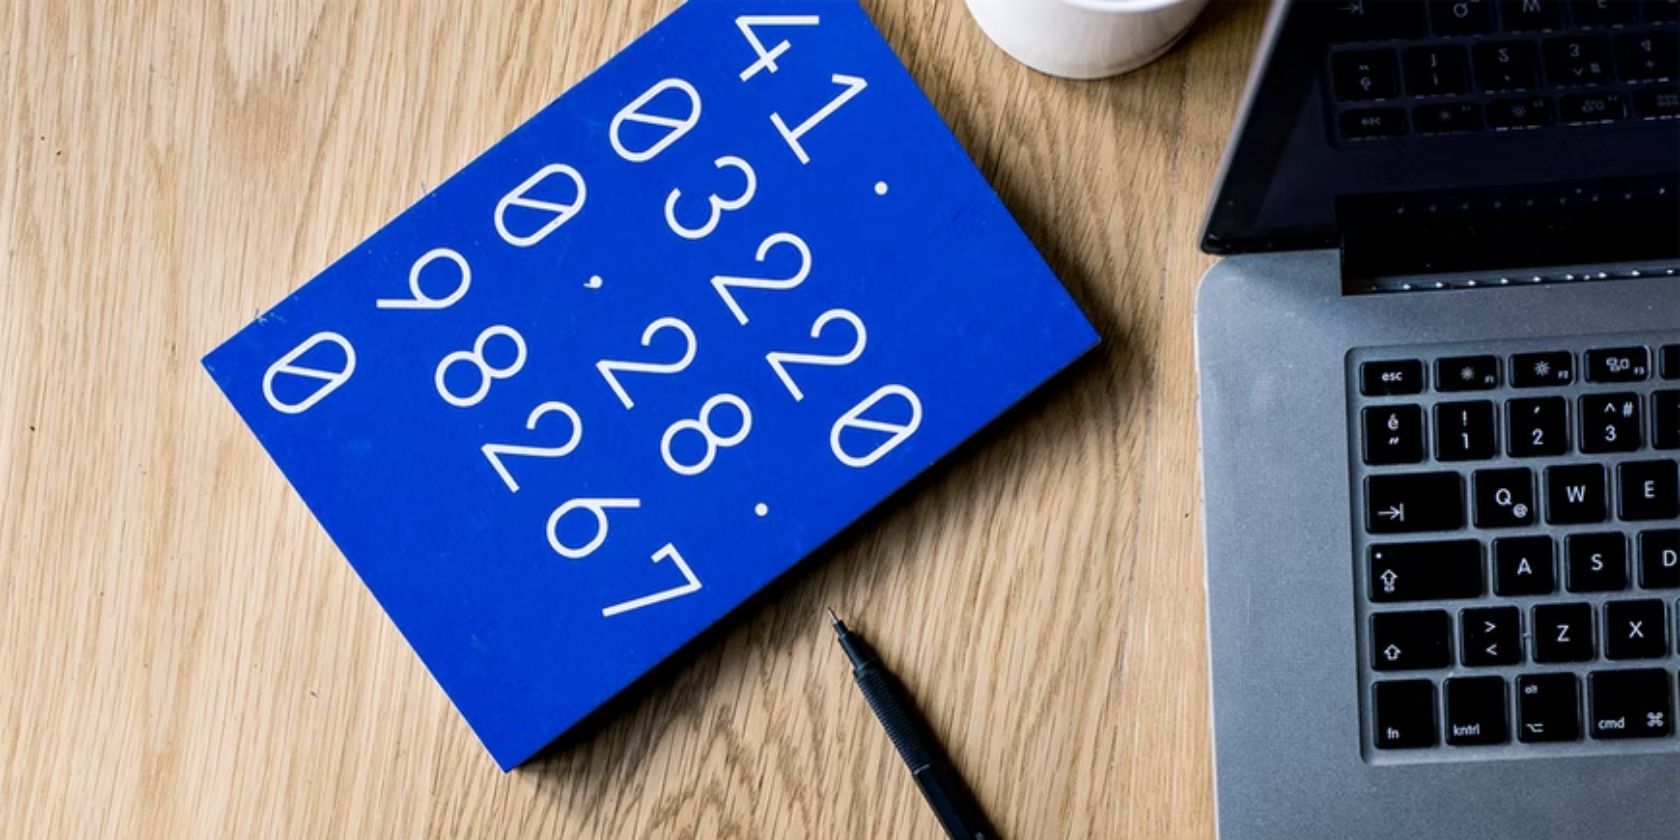 blue notebook with numbers on the cover placed next to laptop and pen on wooden surface